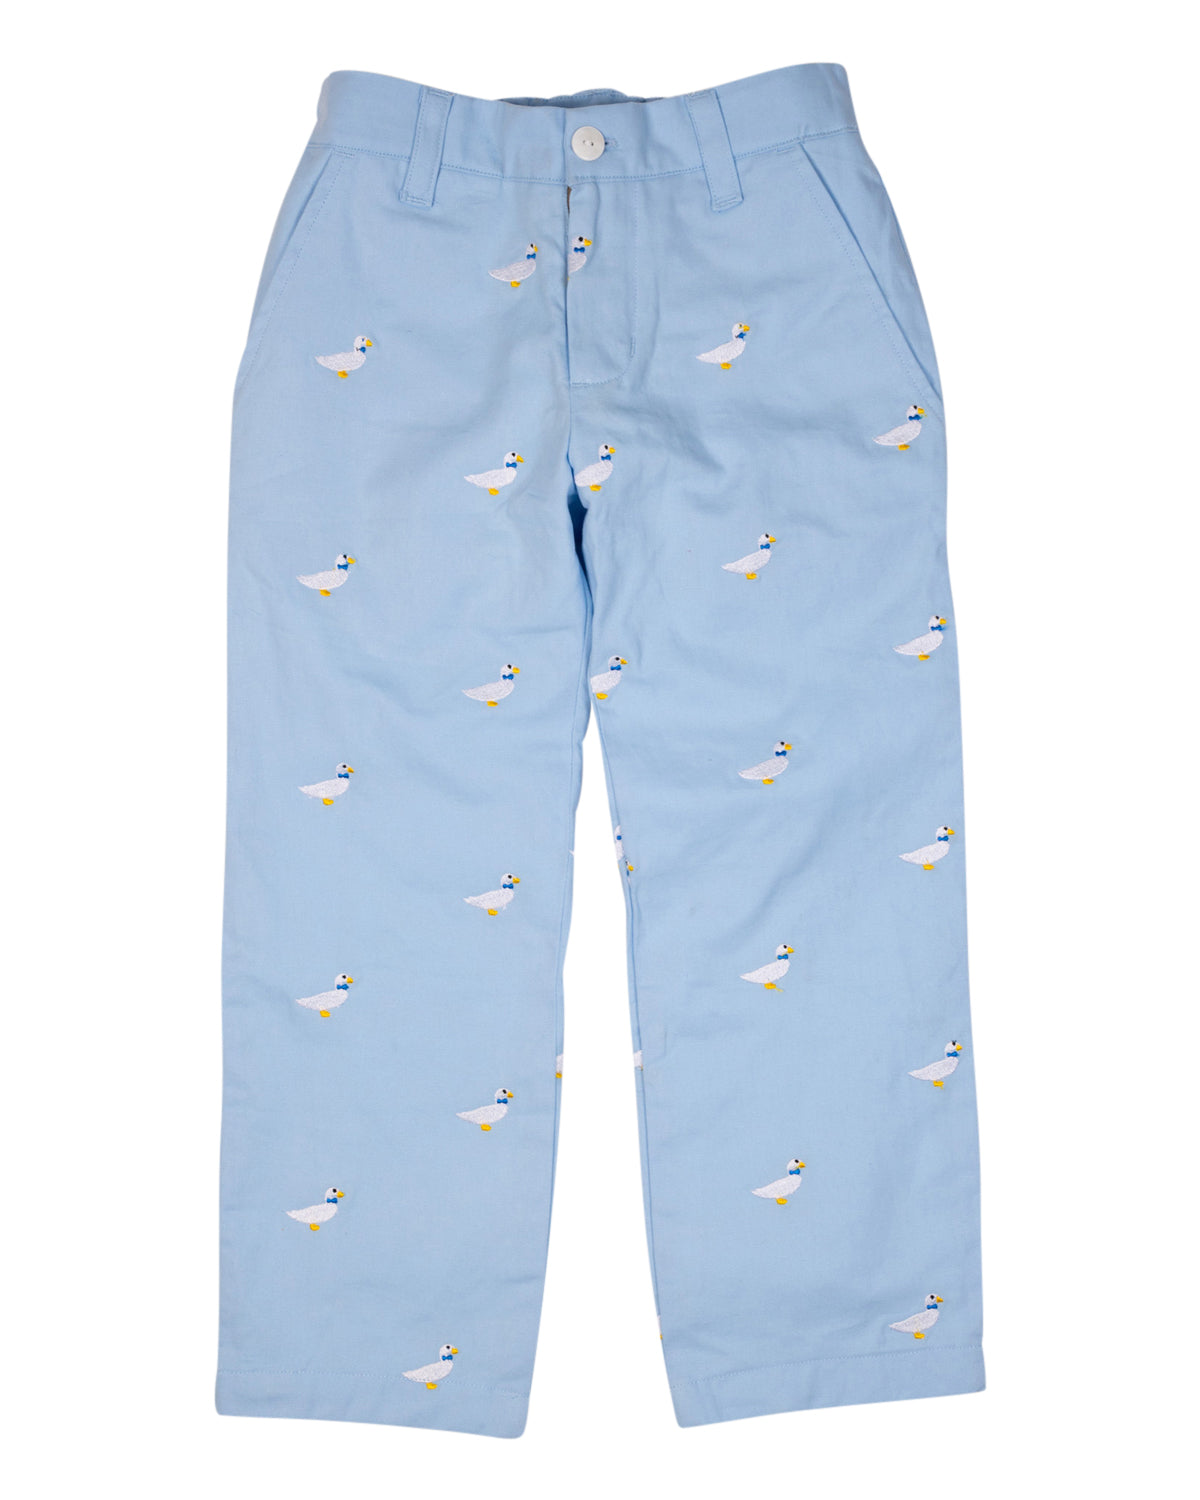 Duck Crossing Embroidered Pants